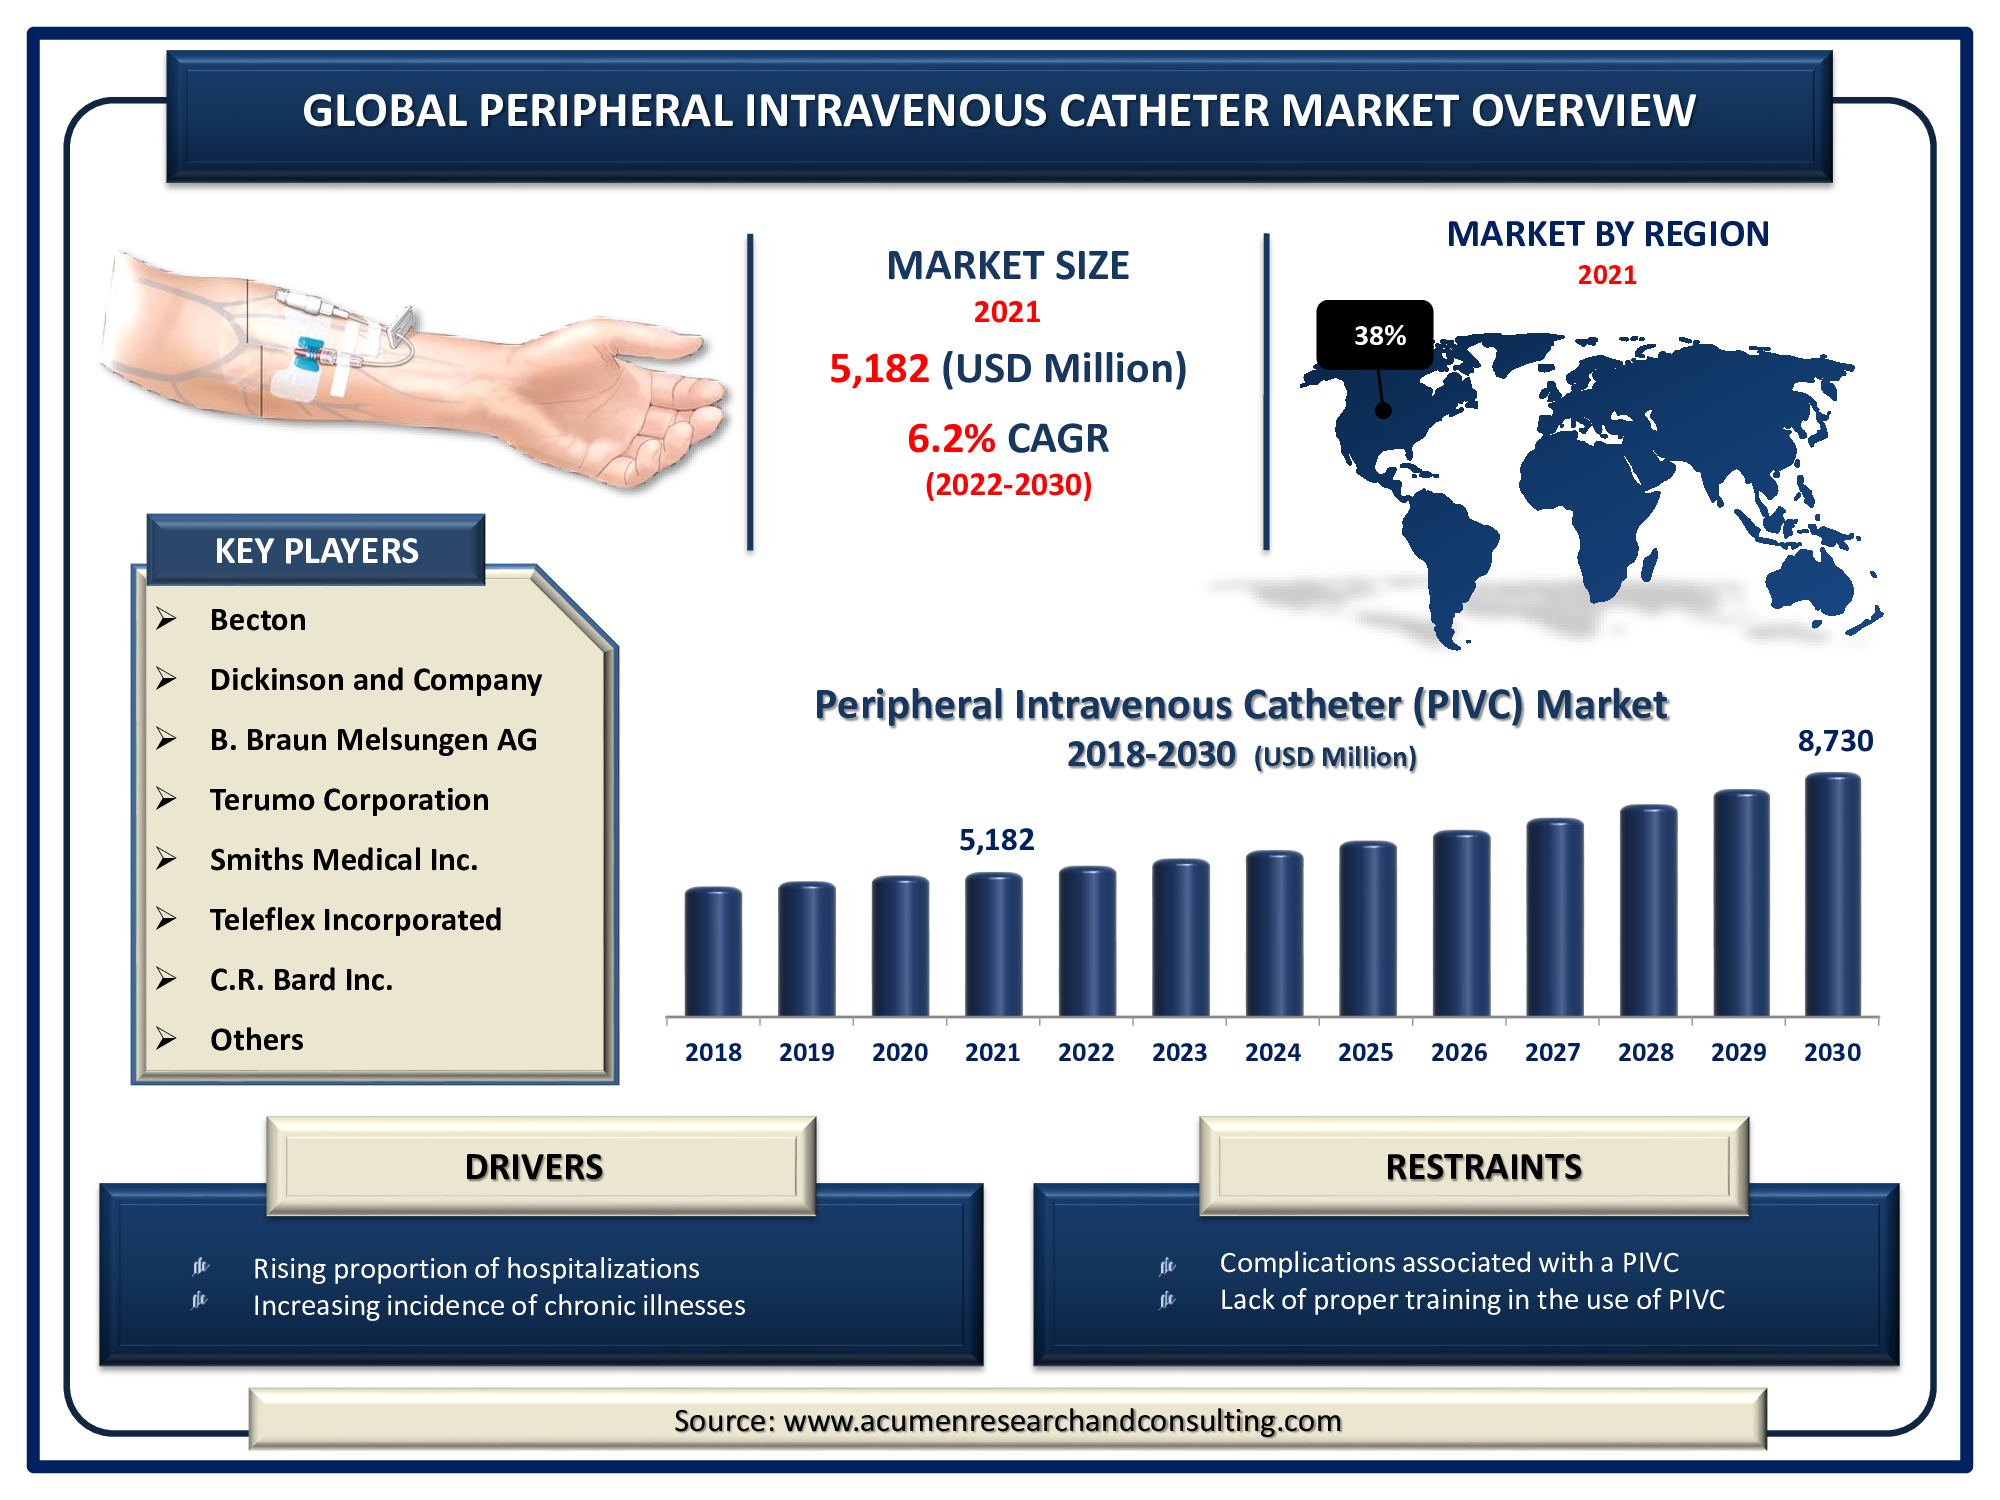 The Global Peripheral Intravenous Catheter (PIVC) Market Size was valued at USD 5,182 Million in 2021 and is predicted to be worth USD 8,730 Million by 2030, with a CAGR of 6.2% from 2022 to 2030.